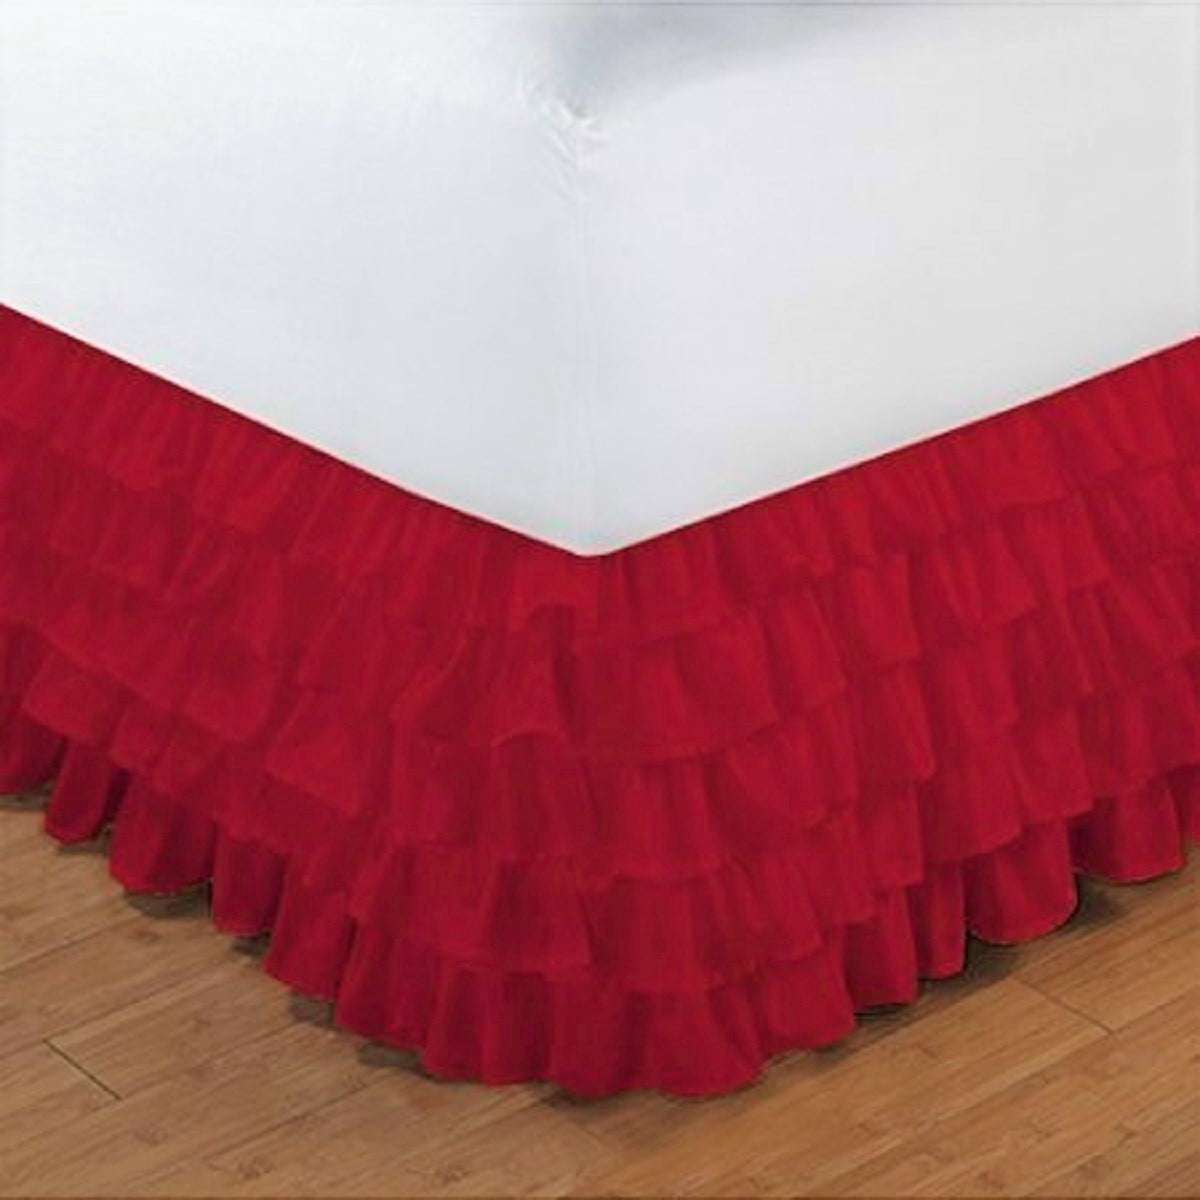 14" DROP SOLID EASY FIT SET UP PLEATED ALL CORNERS 1 PC BED SKIRT RED KING 